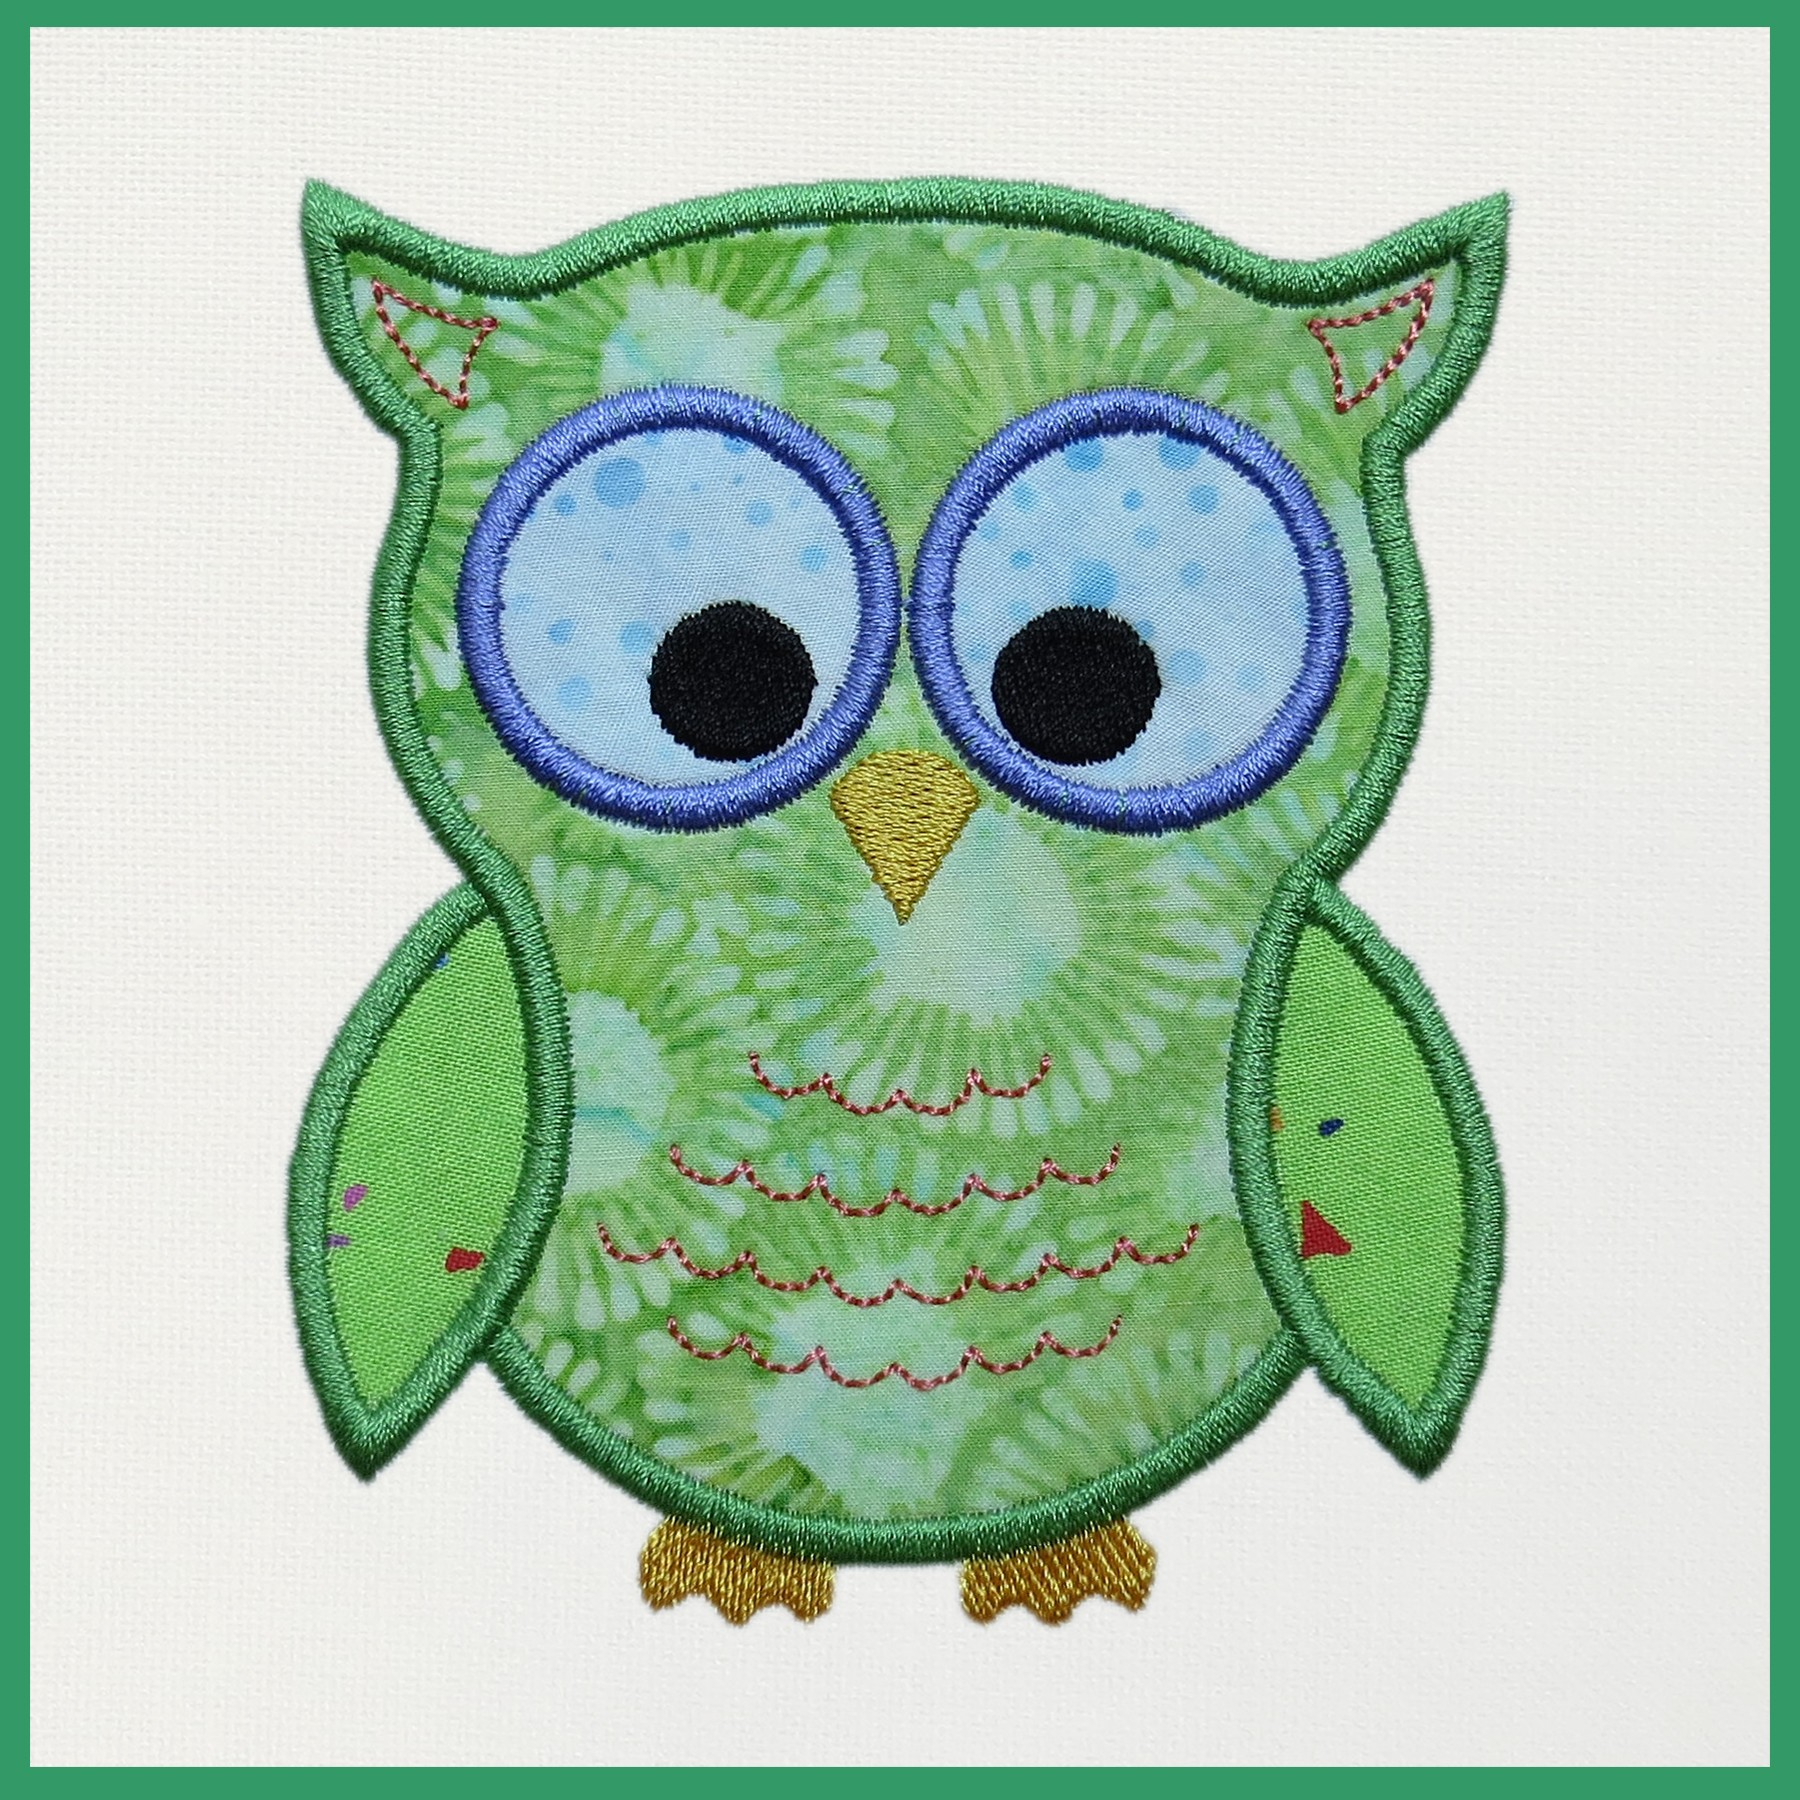 Machine Embroidery Patterns Free Download 14 Owl Embroidery Designs Free Download Images Free Owl Applique